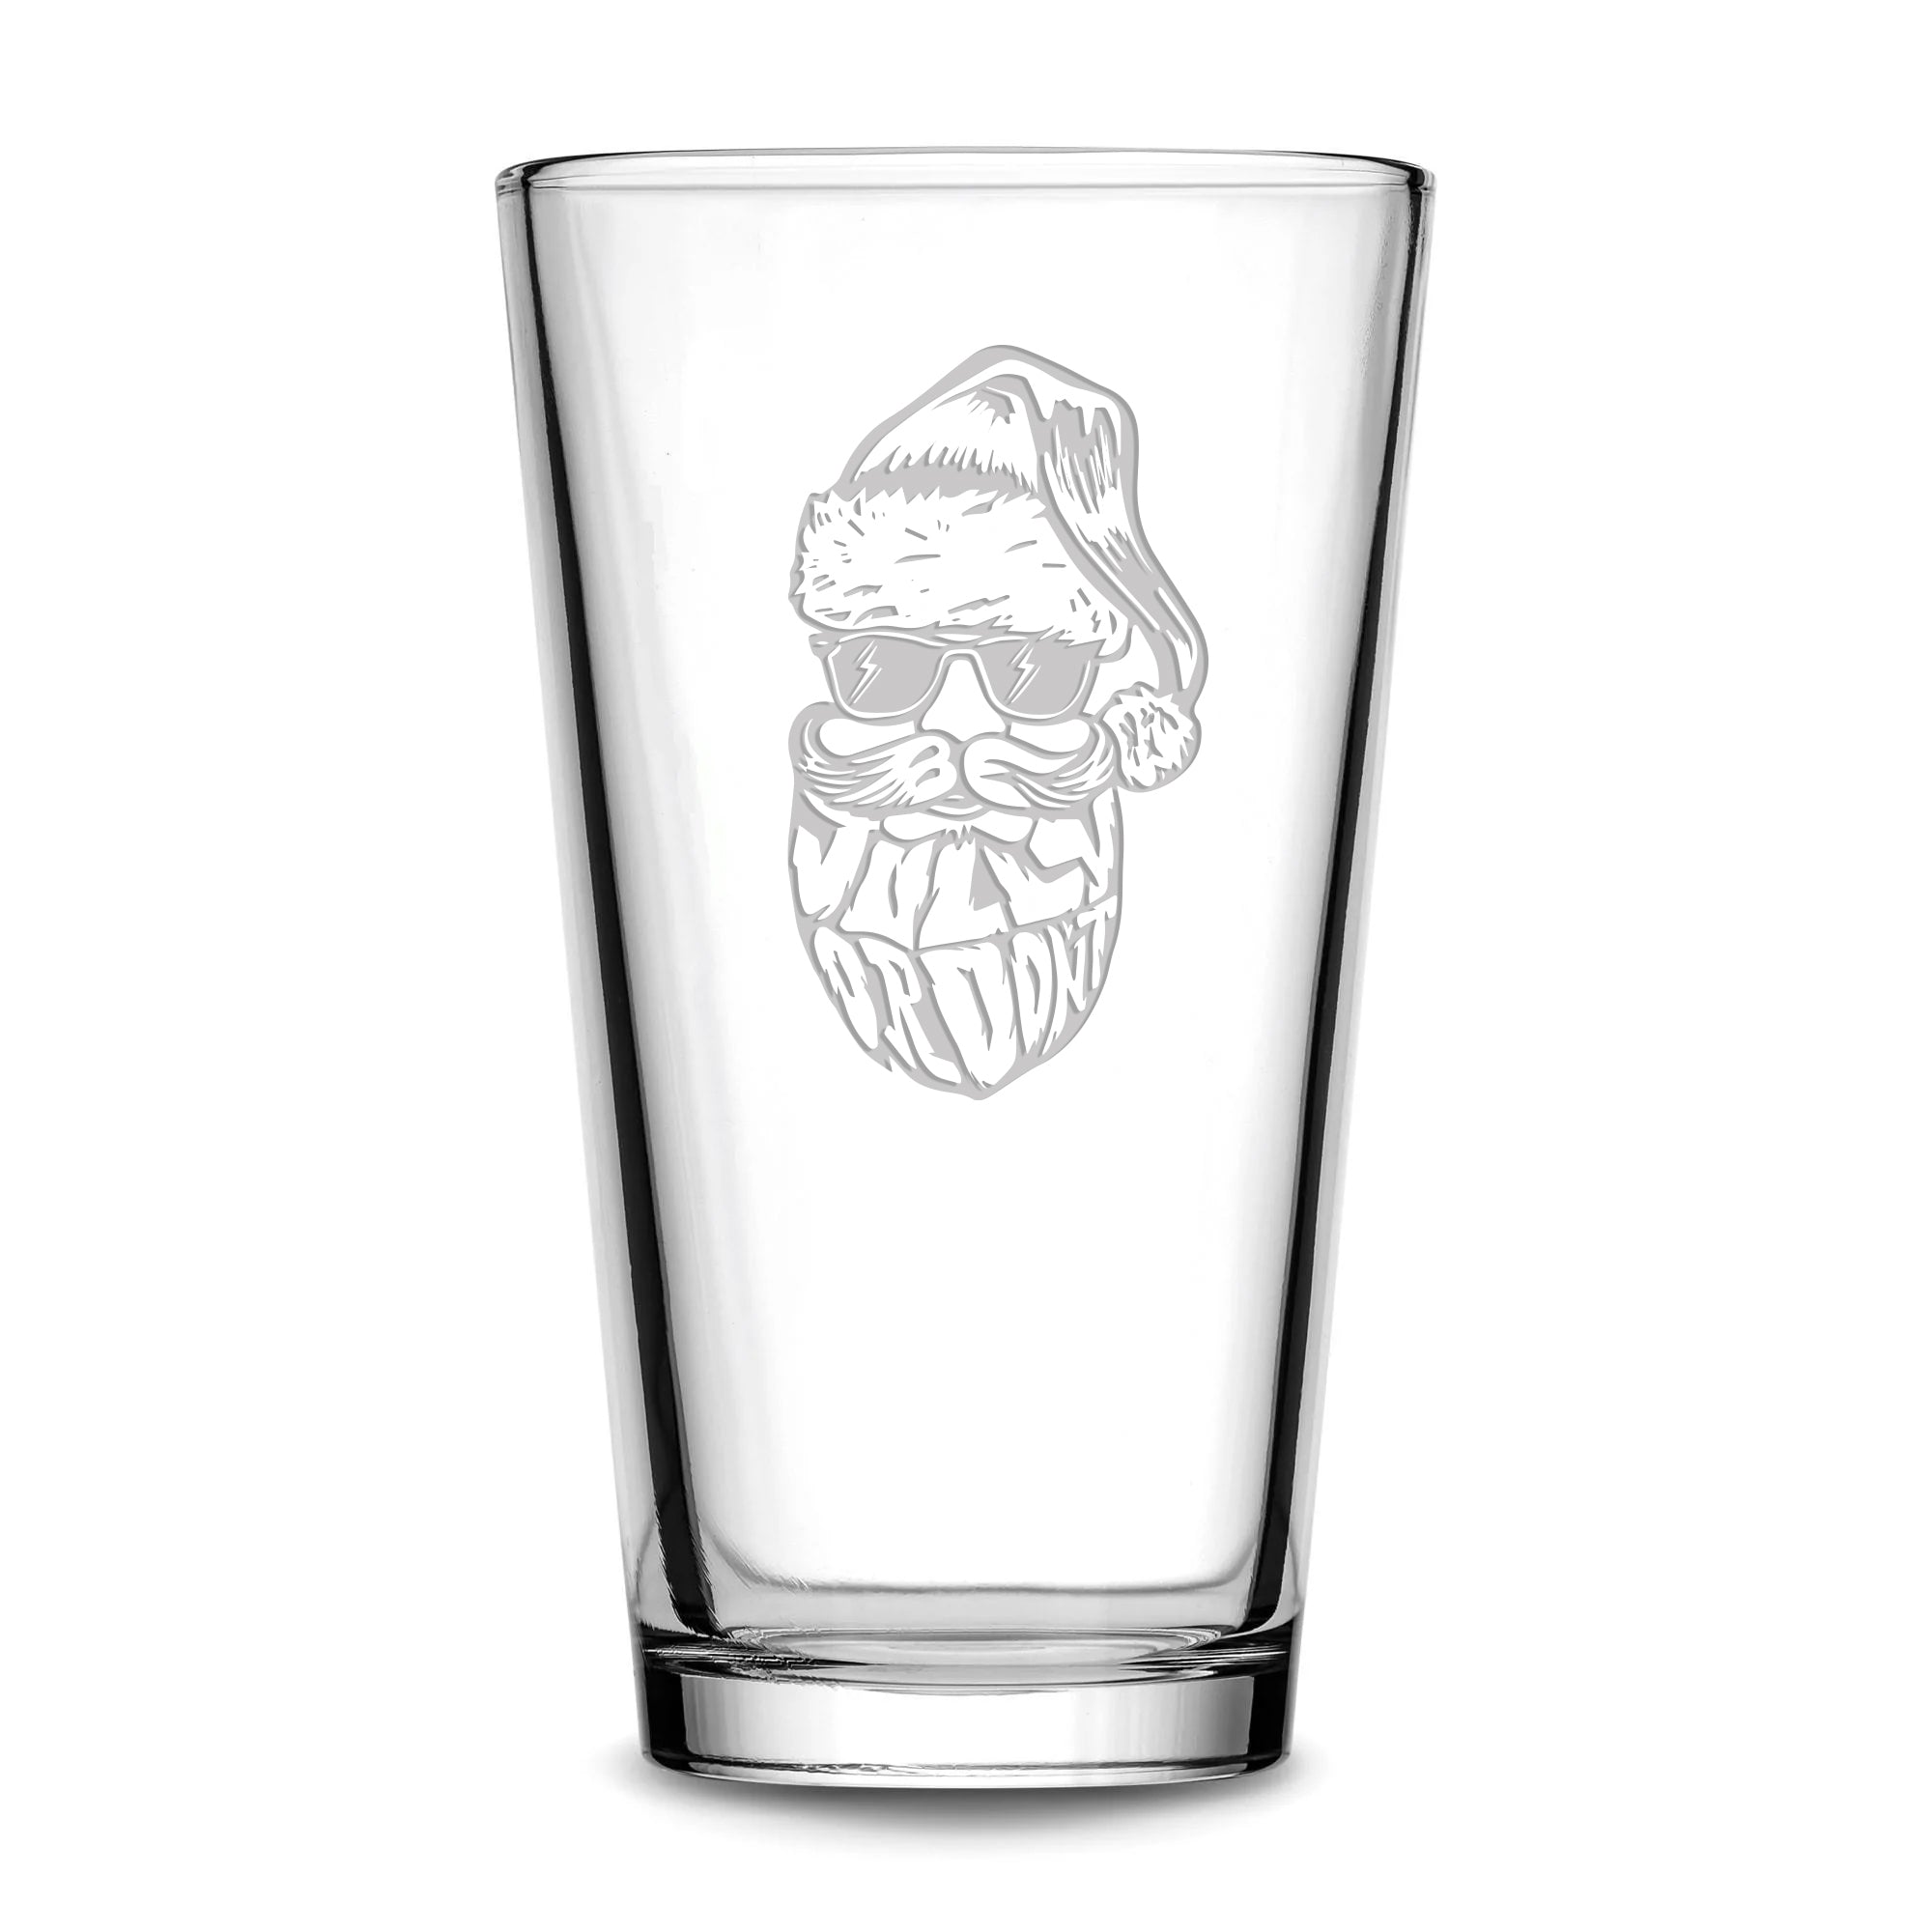 Premium Be Jolly or Don't, Christmas Pint Glass, 16oz, Laser Etched or Hand Etched